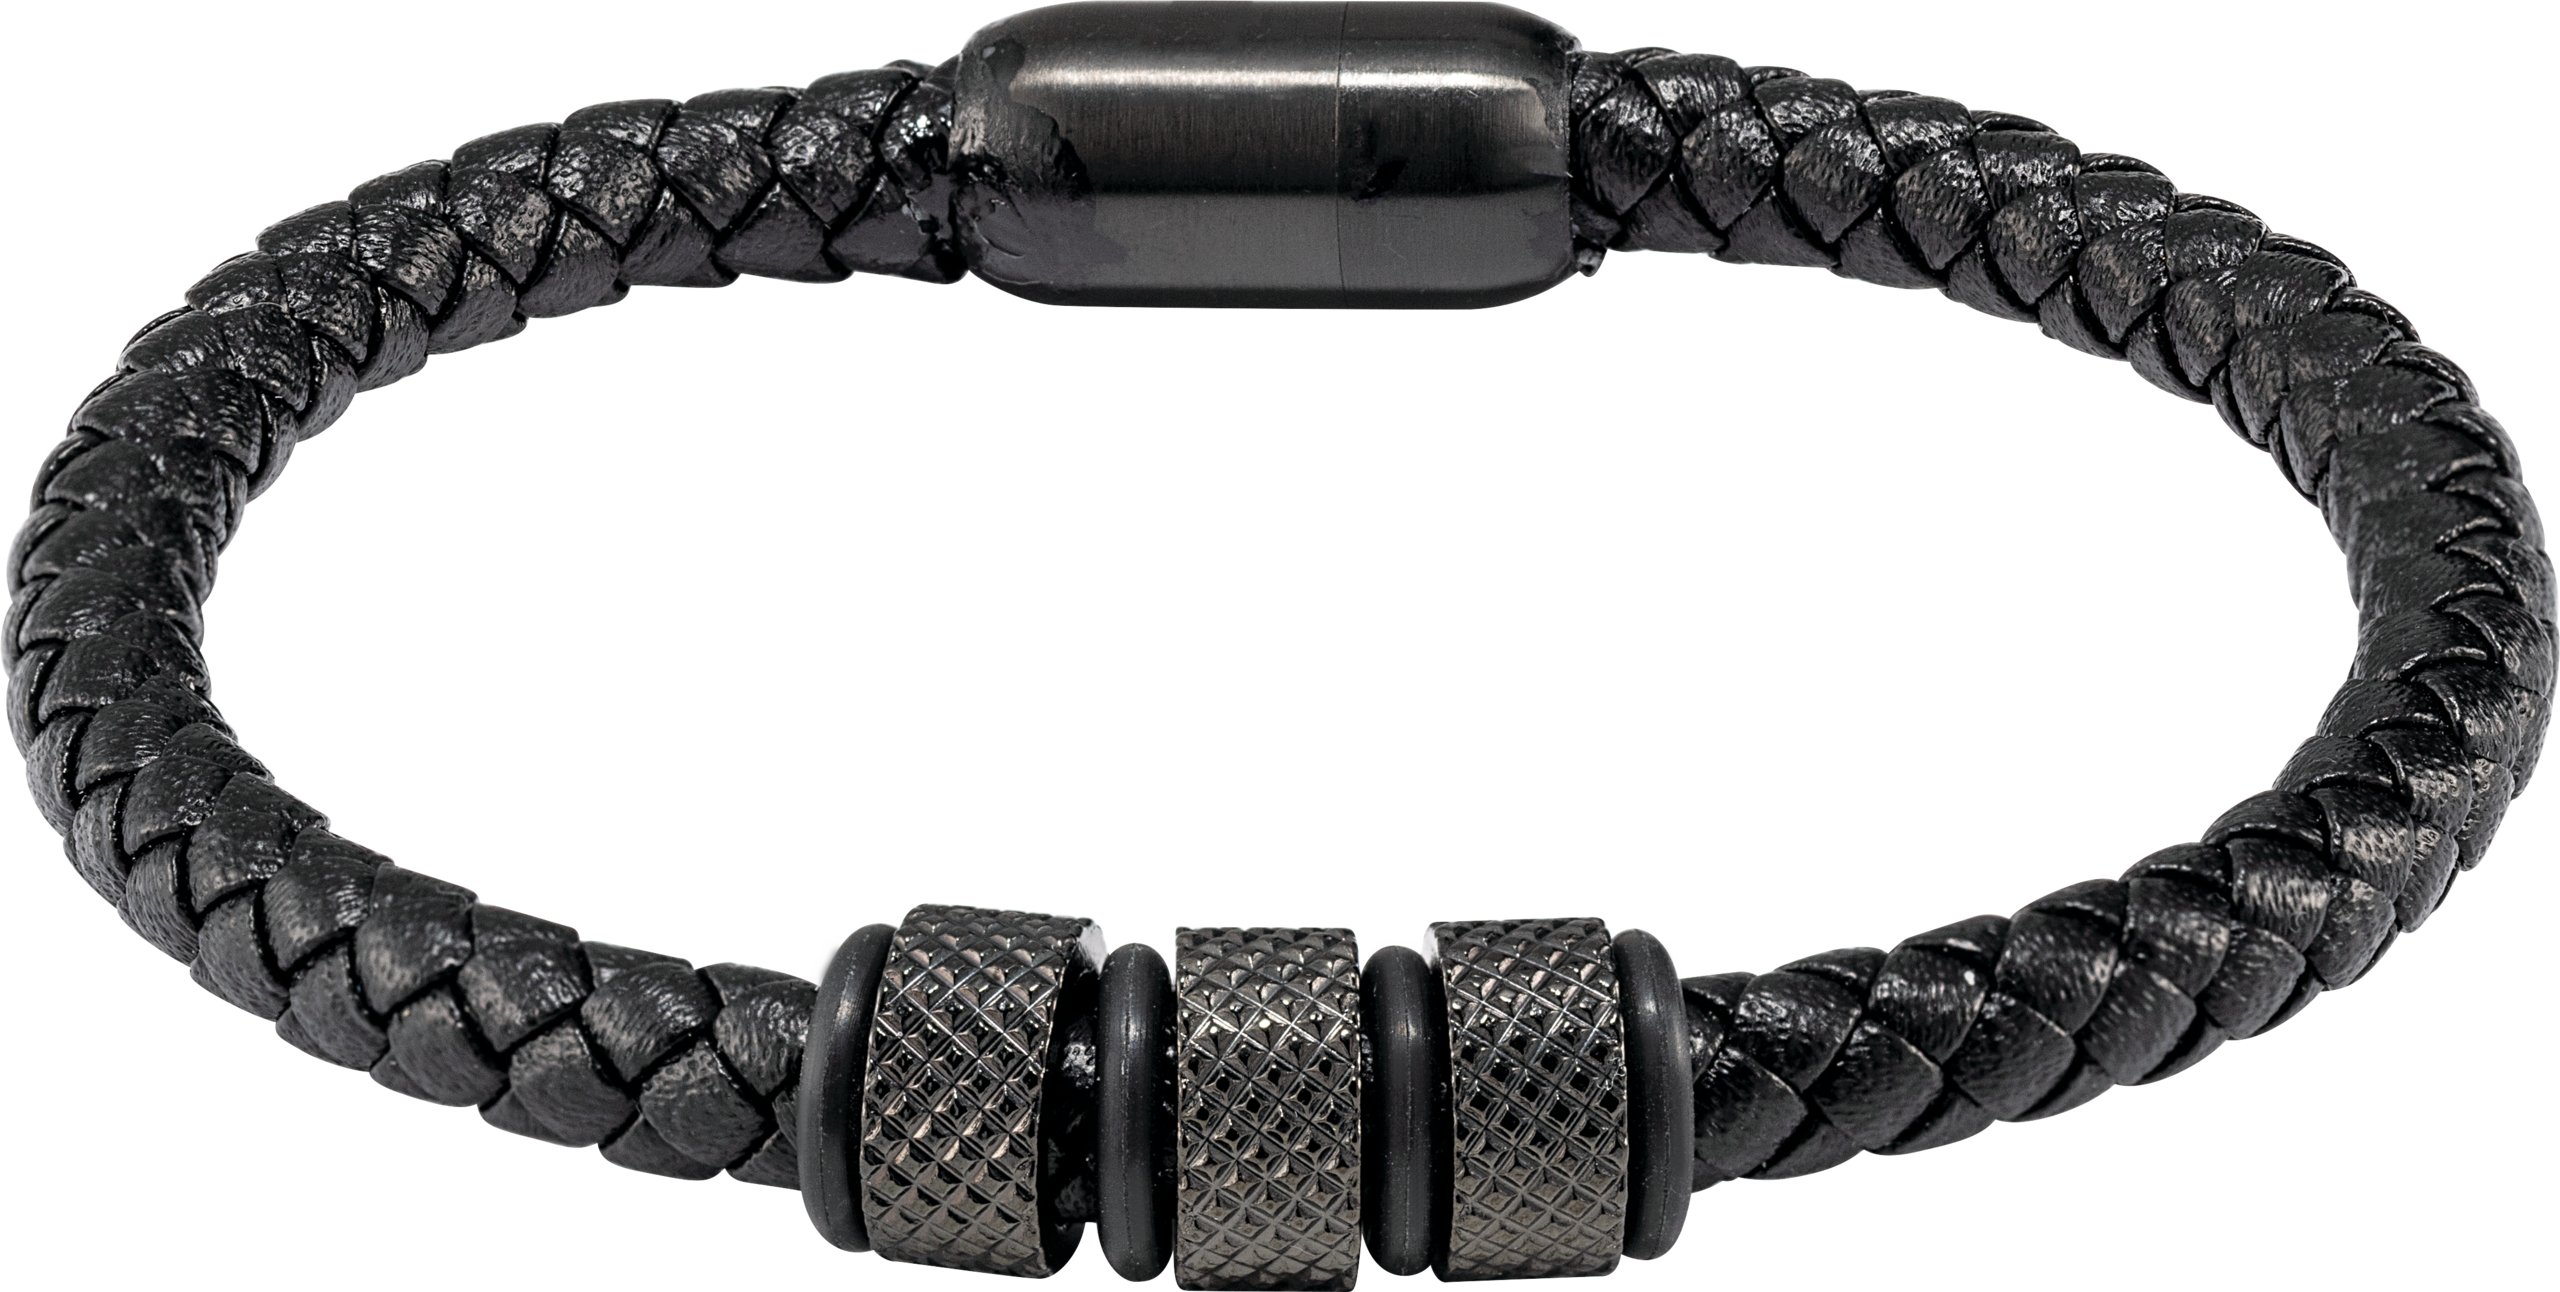 Black PVD Stainless Steel 6 mm Braided Leather 8